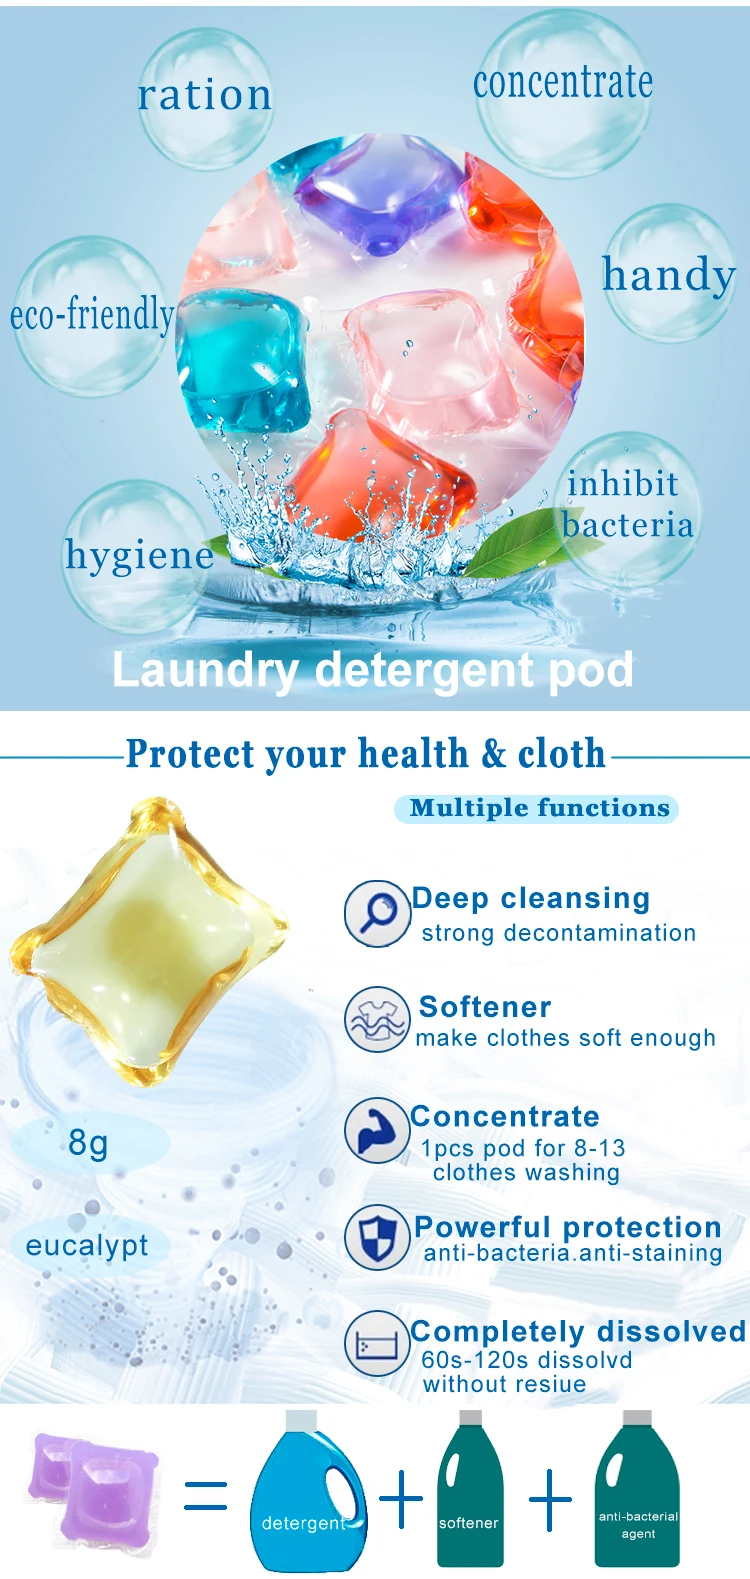 Anti-Bacterial sales promotion capsule laundry capsule laundry pods perfume beads high washing detergent pods liquid